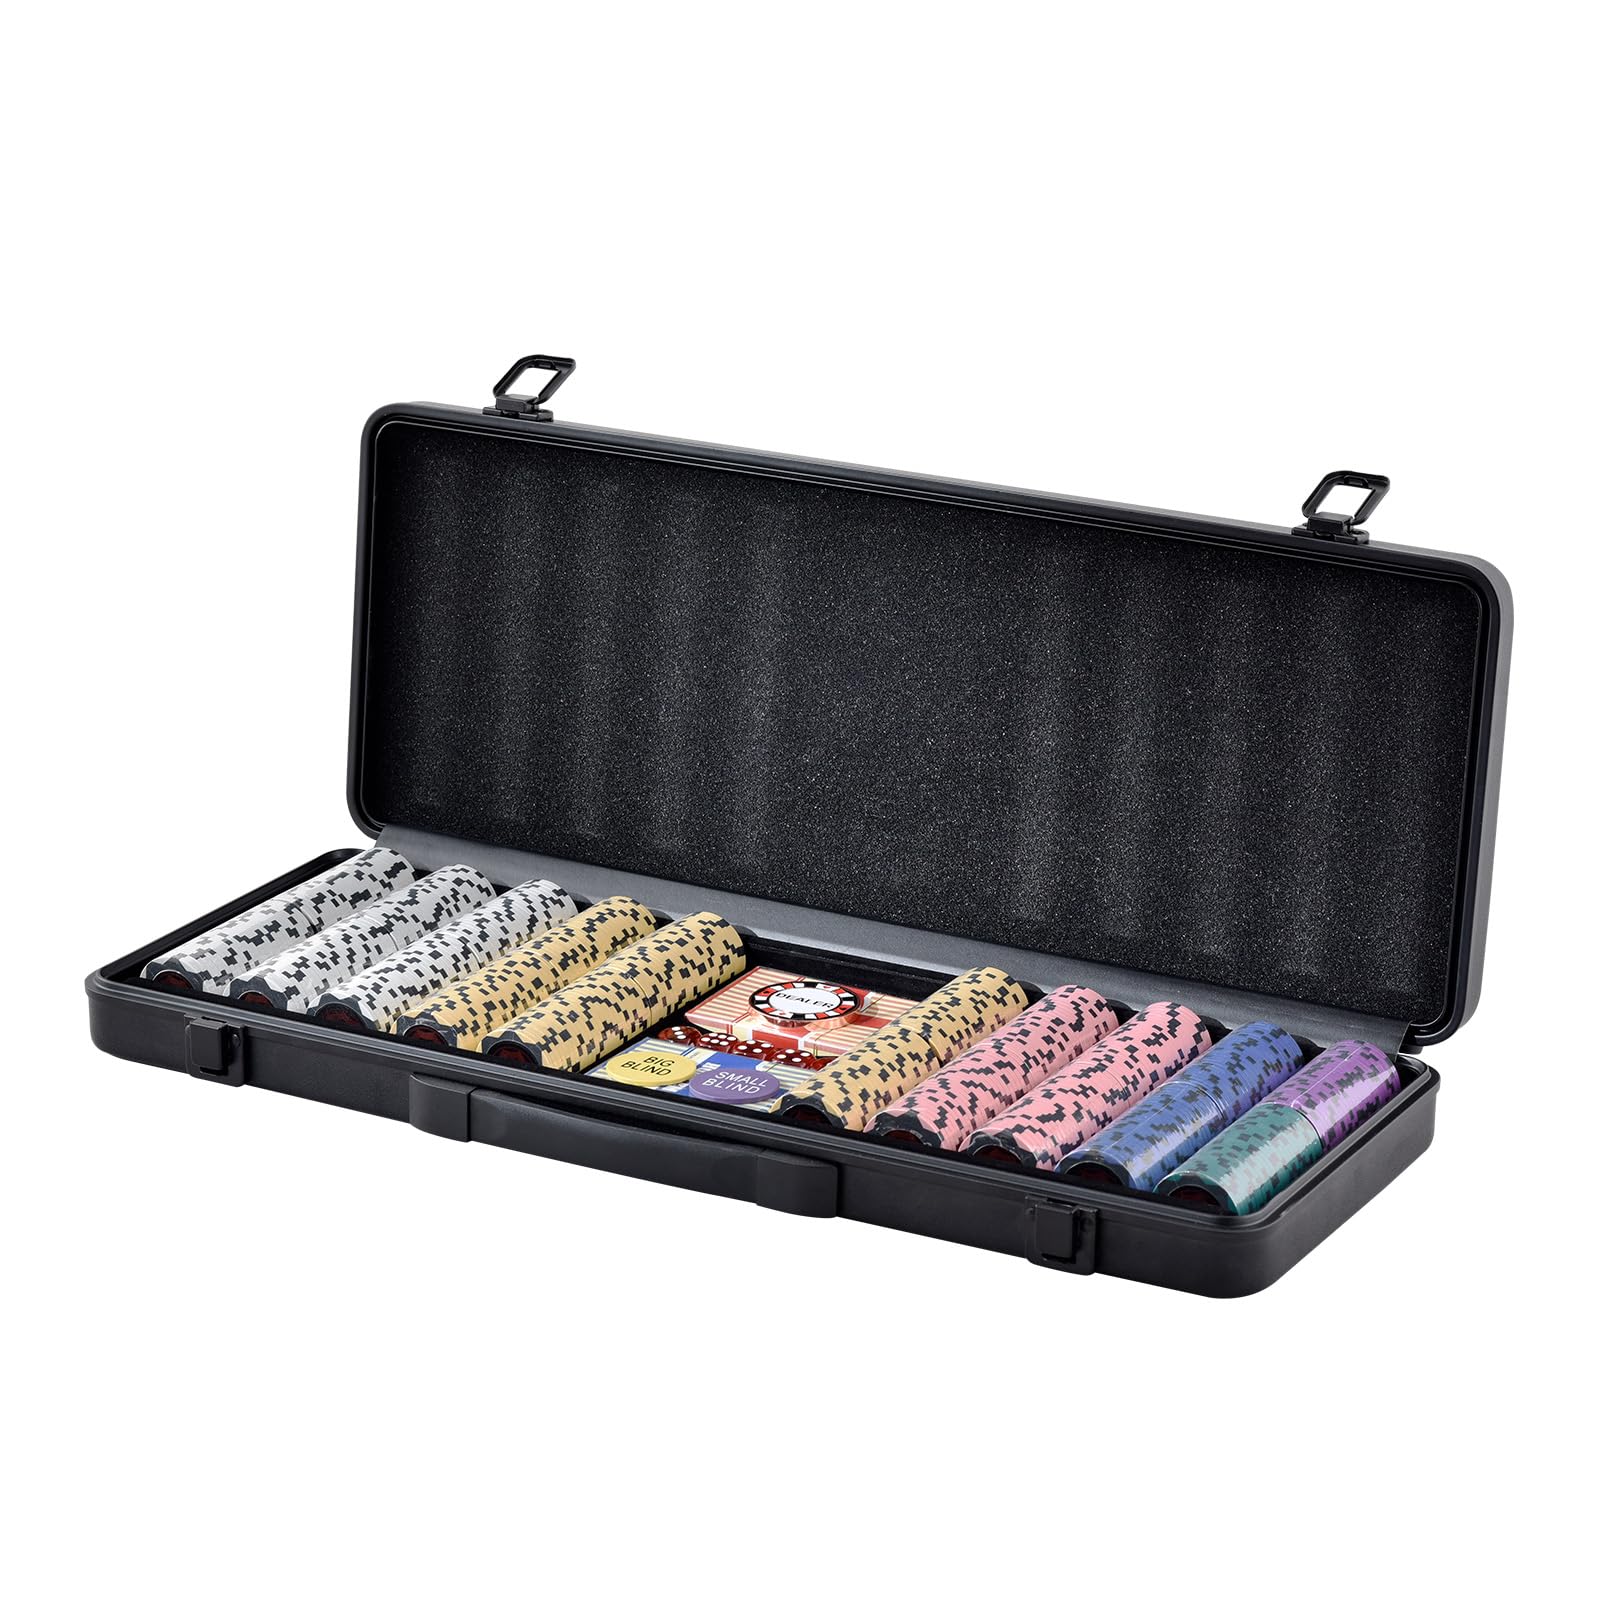 VEVOR Poker Chip Set, 500-Piece Poker Set, Complete Poker Playing Game Set with Carrying Case, Heavyweight 14 Gram Casino Clay Chips, Cards, Buttons and Dices, for Texas Hold'em, Blackjack, Gambling